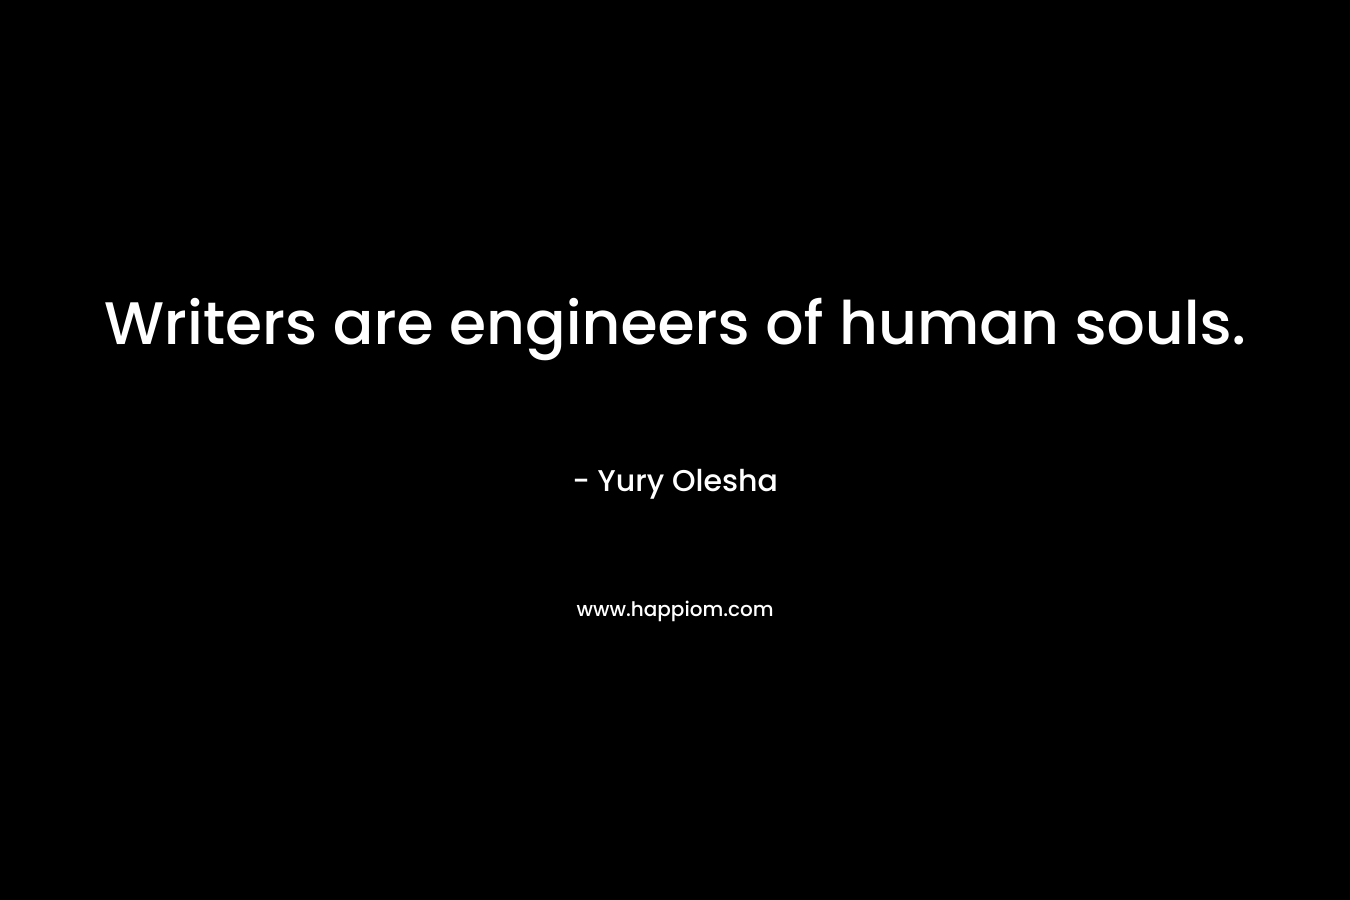 Writers are engineers of human souls.